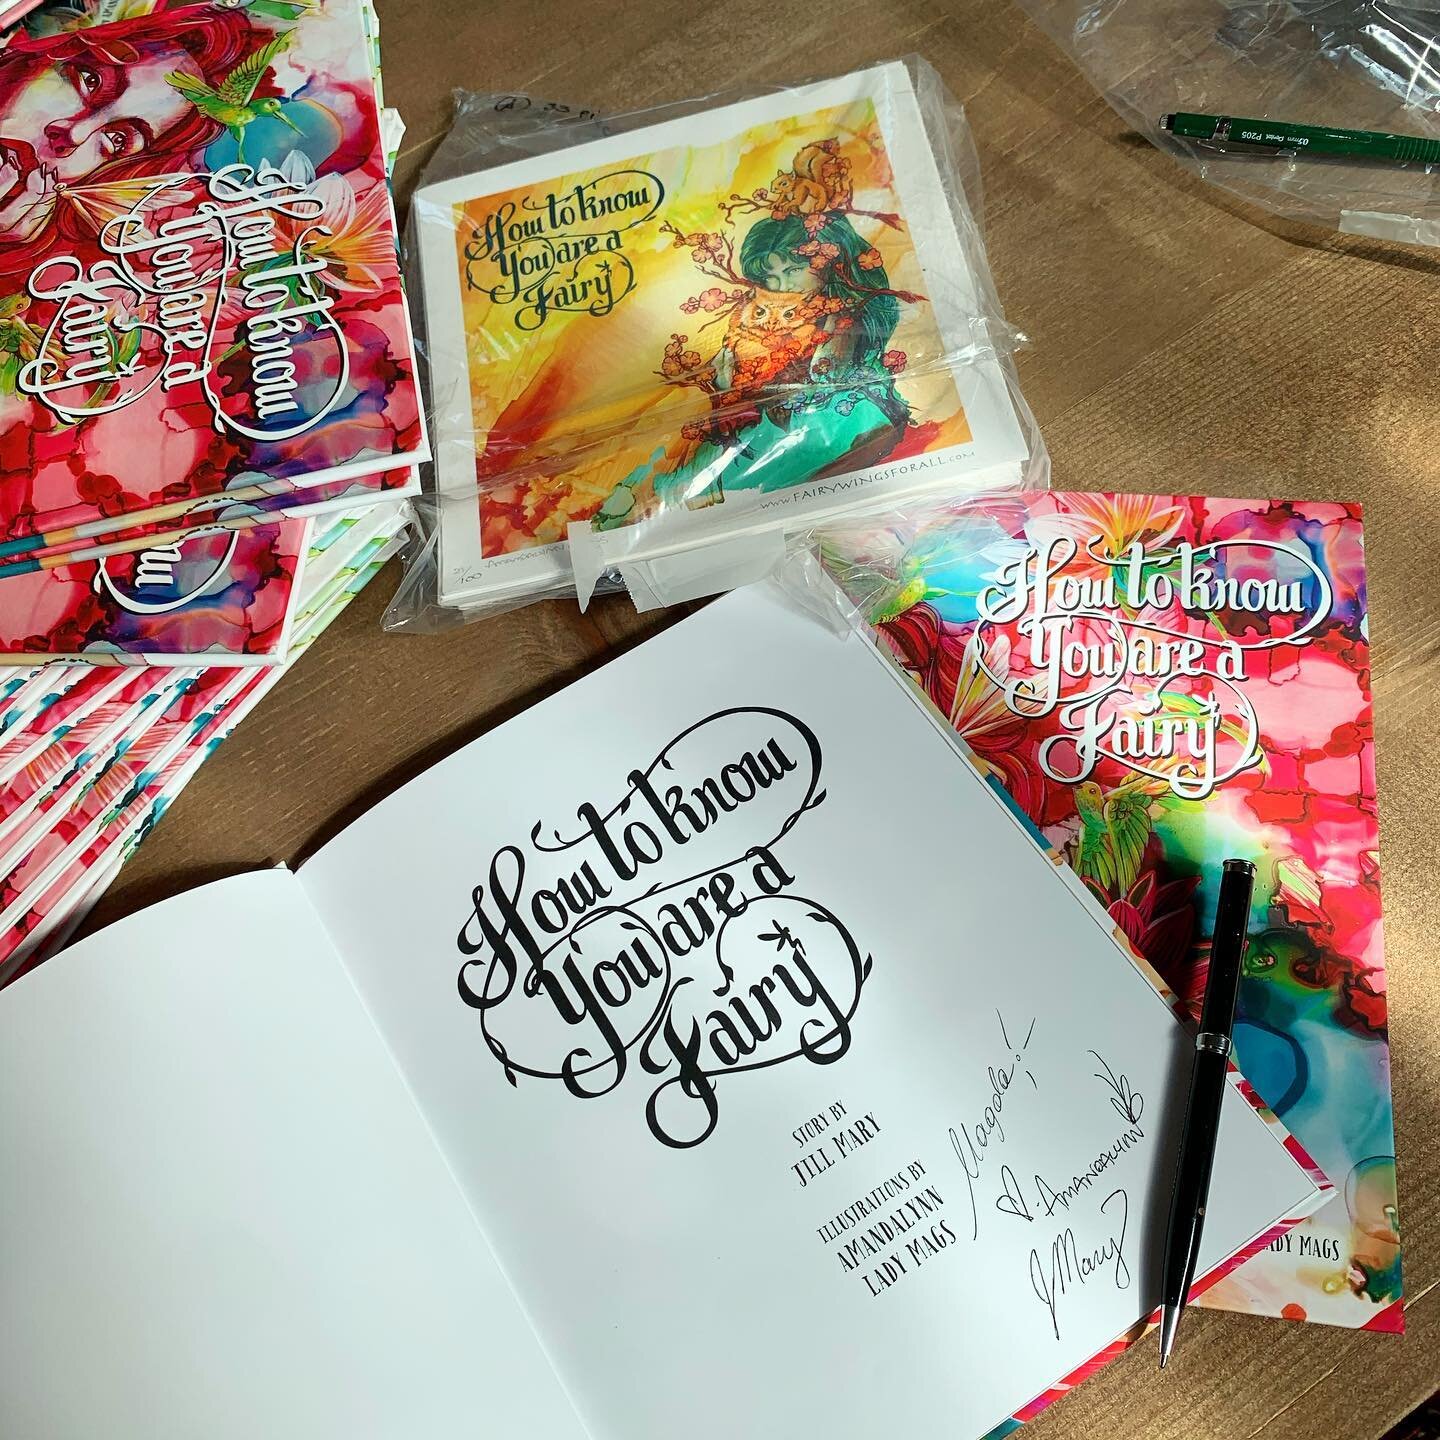 Spent today signing all our books and prints, such a wonderful feeling!! Looking forward to sharing with all of you! Shipments going out early next week ❤️🧚&zwj;♀️✨ #howtoknowyouareafairy #fairywingsforall @lady_mags @alynnpaint @venetiajillian #Aly